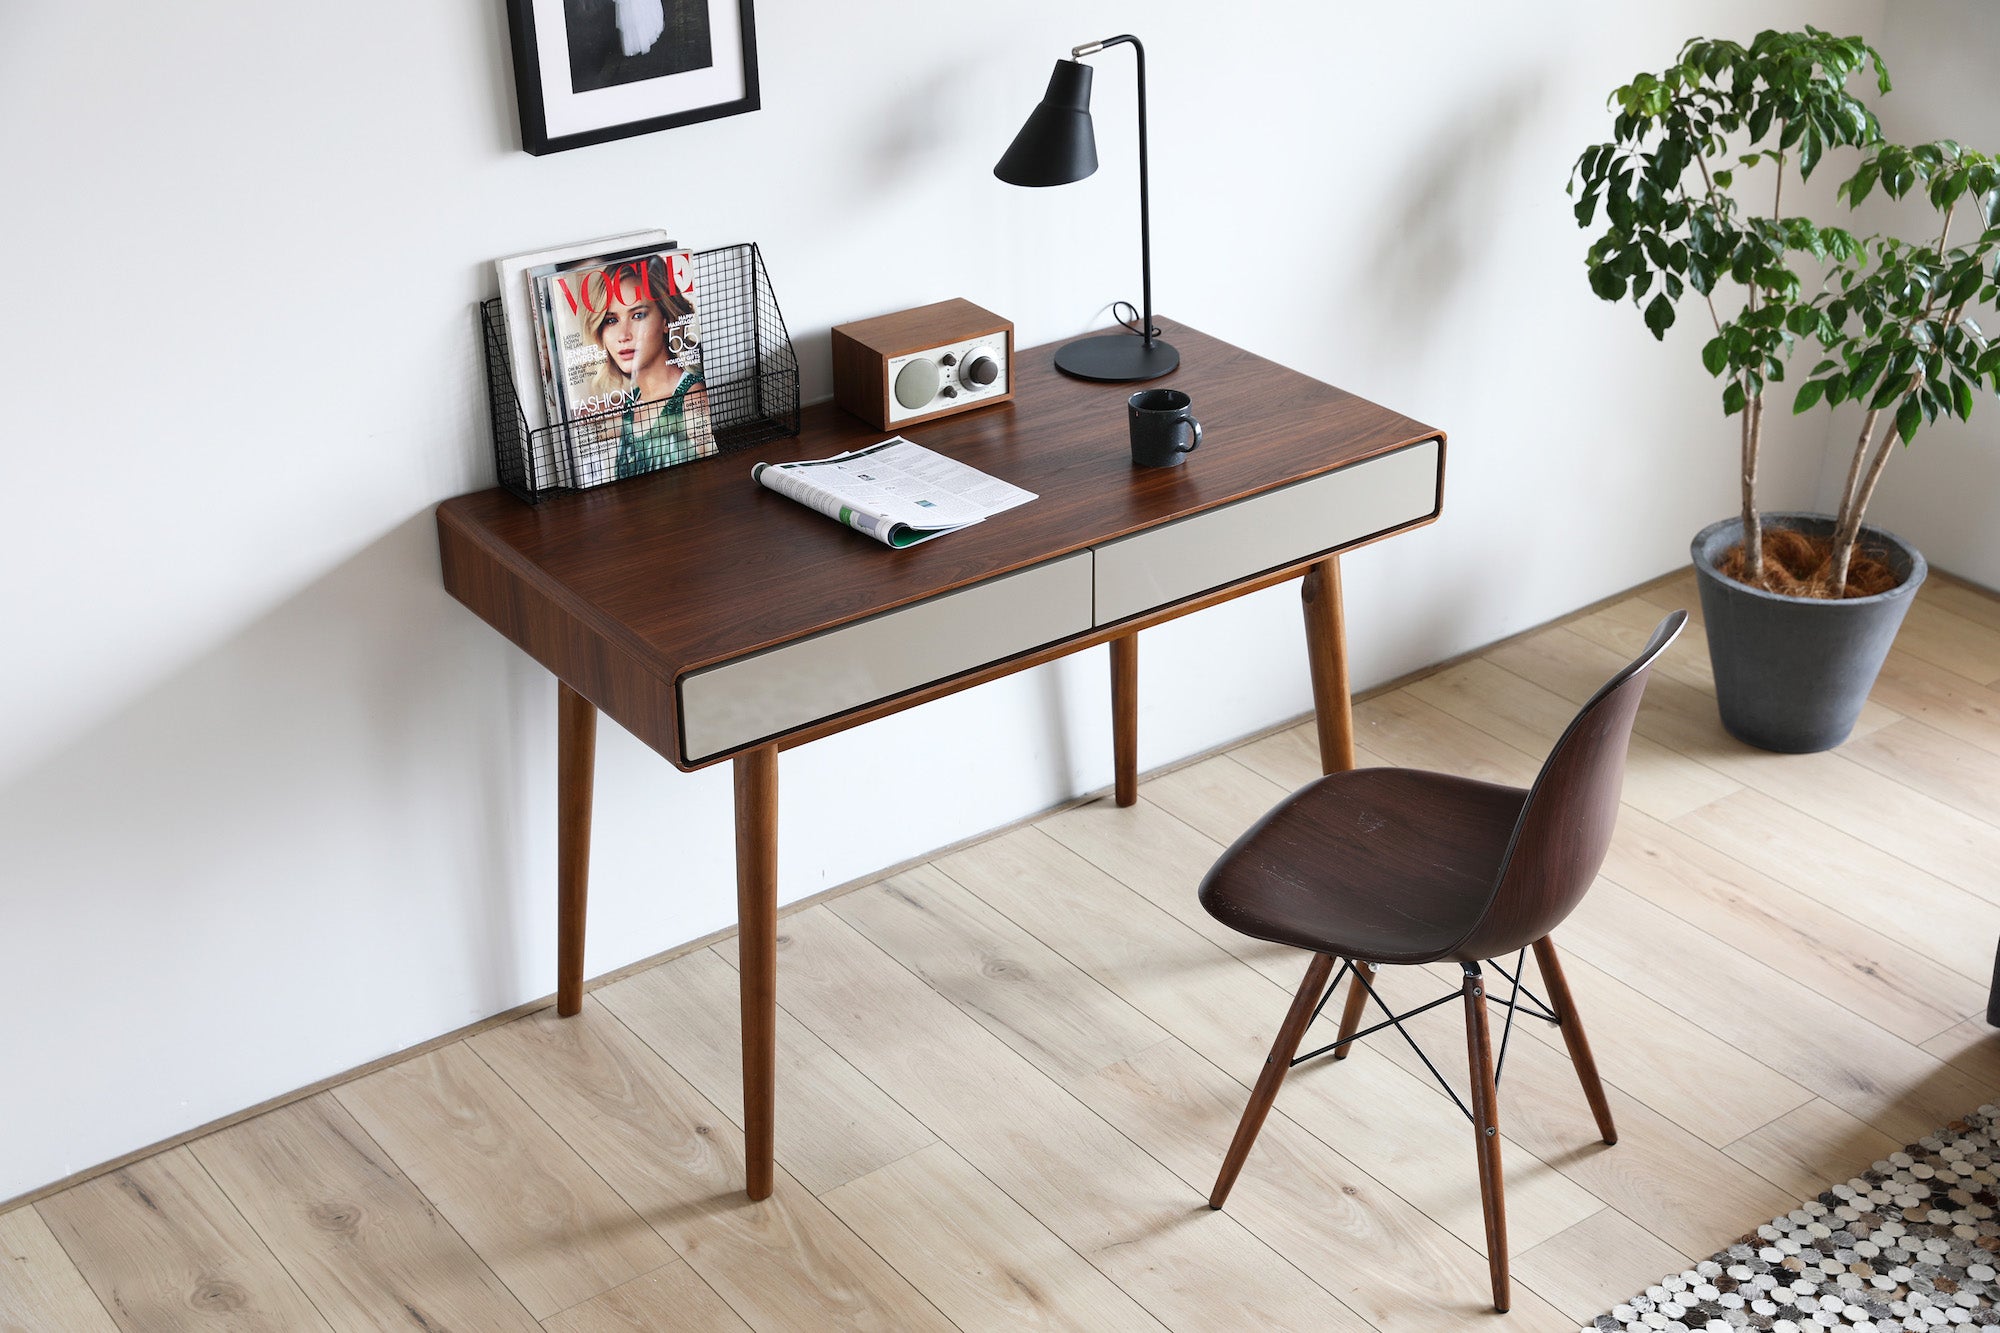 Walnut Desk and chair